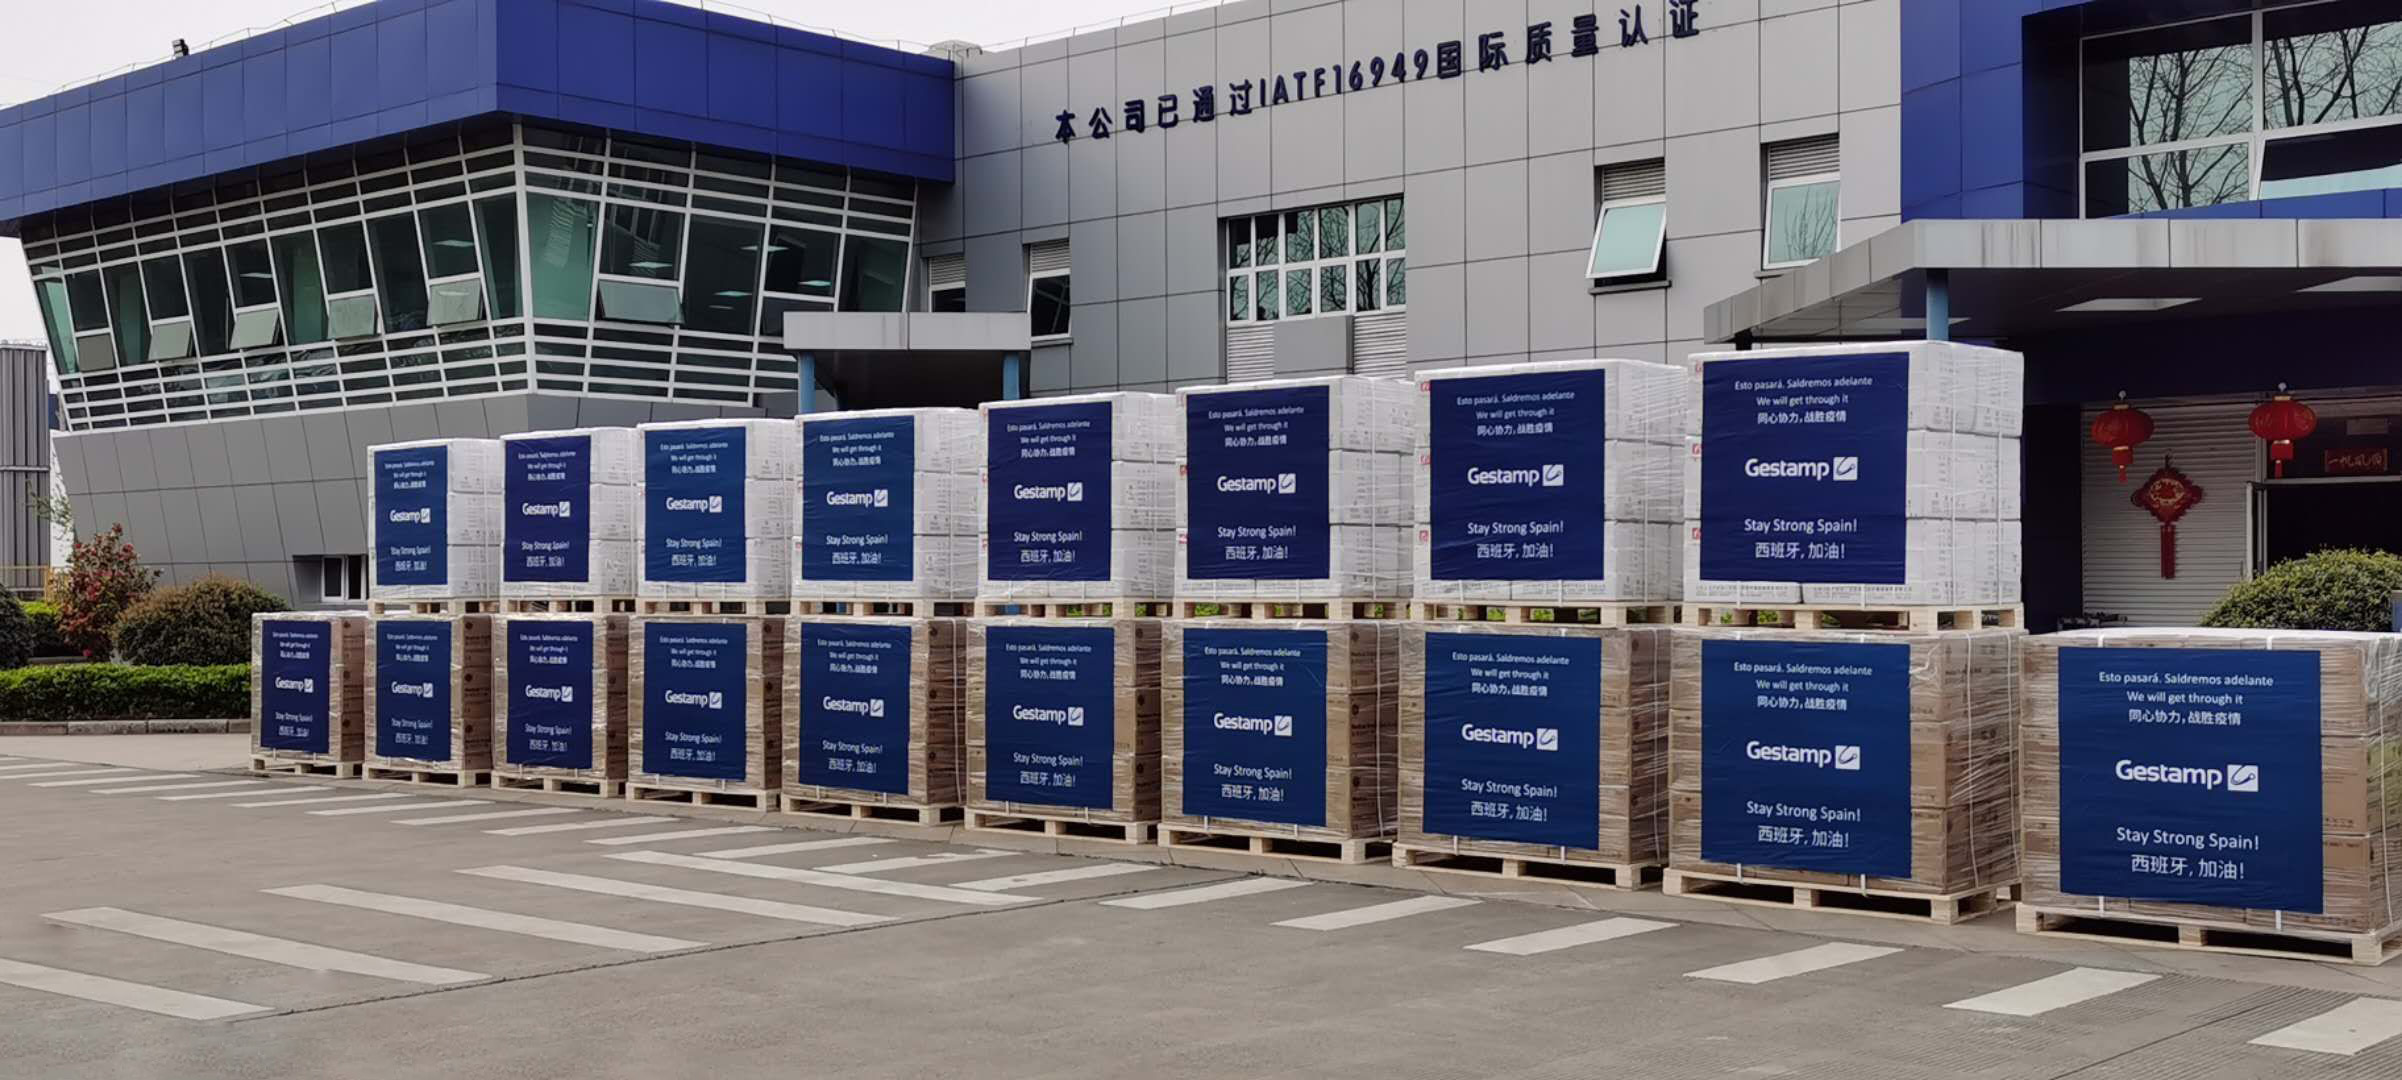 Sanitary equipment bought by Gestamp at Gestamp Kushan, in China.